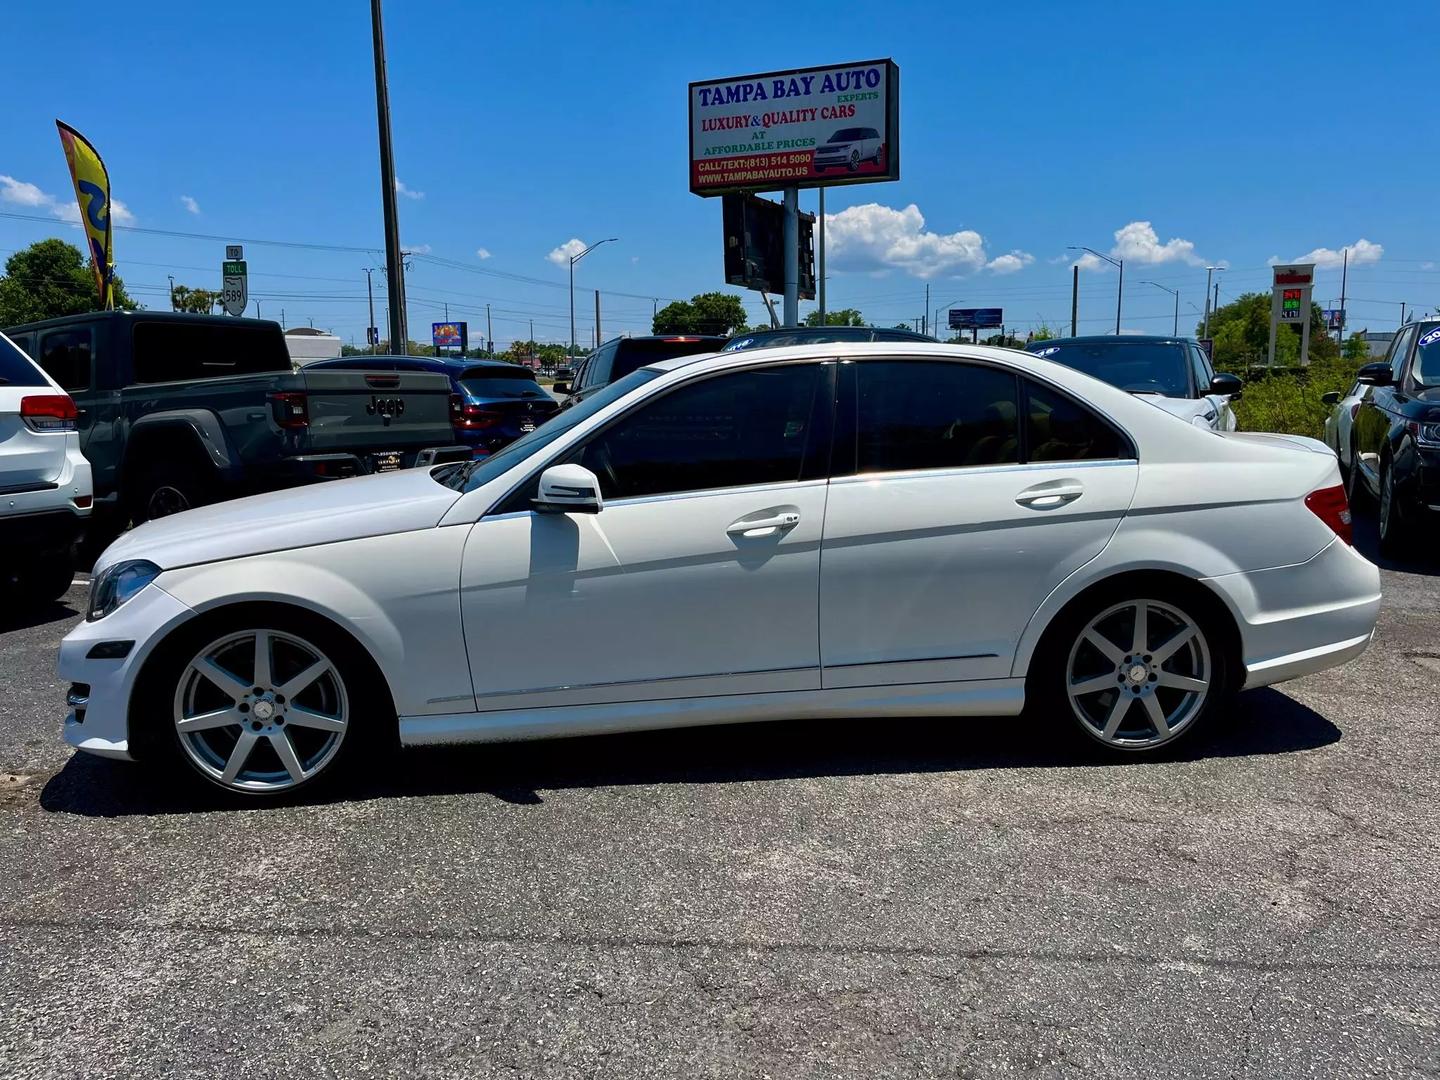 Used 2014 Mercedes-Benz C-Class C250 Sport with VIN WDDGF4HBXEA957169 for sale in Tampa, FL